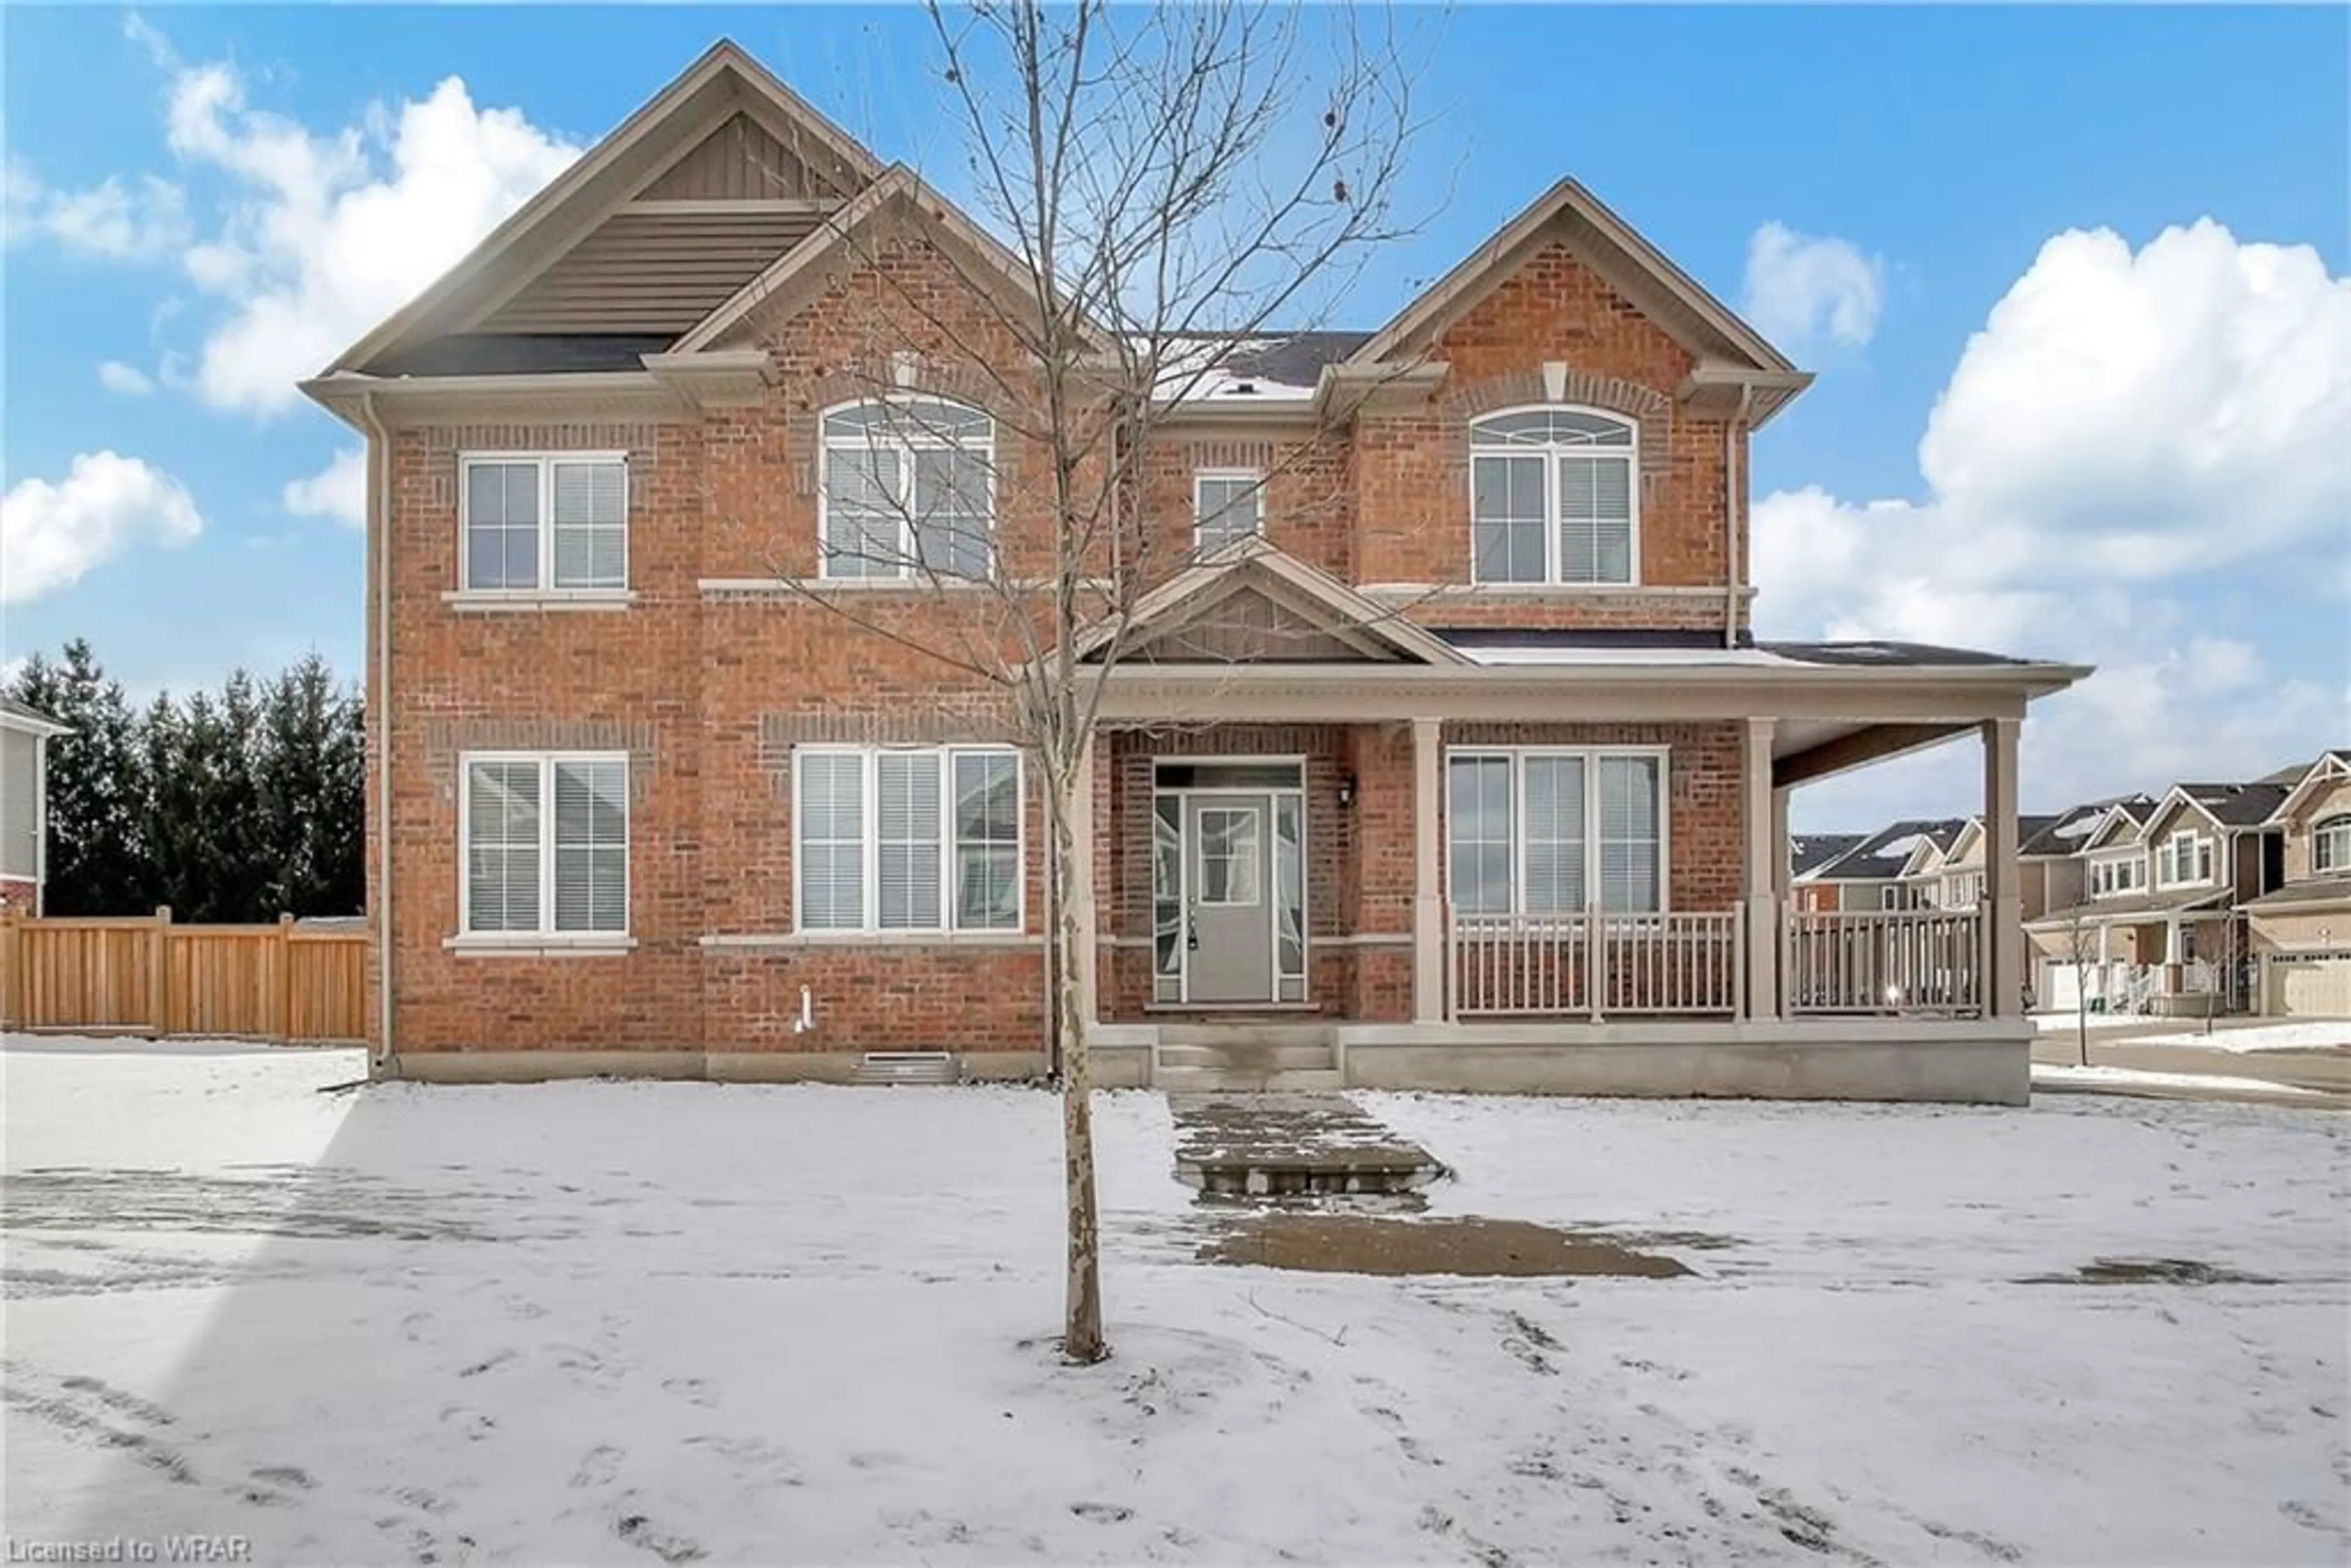 Home with brick exterior material for 47 Pointer St, Cambridge Ontario N3H 4R6